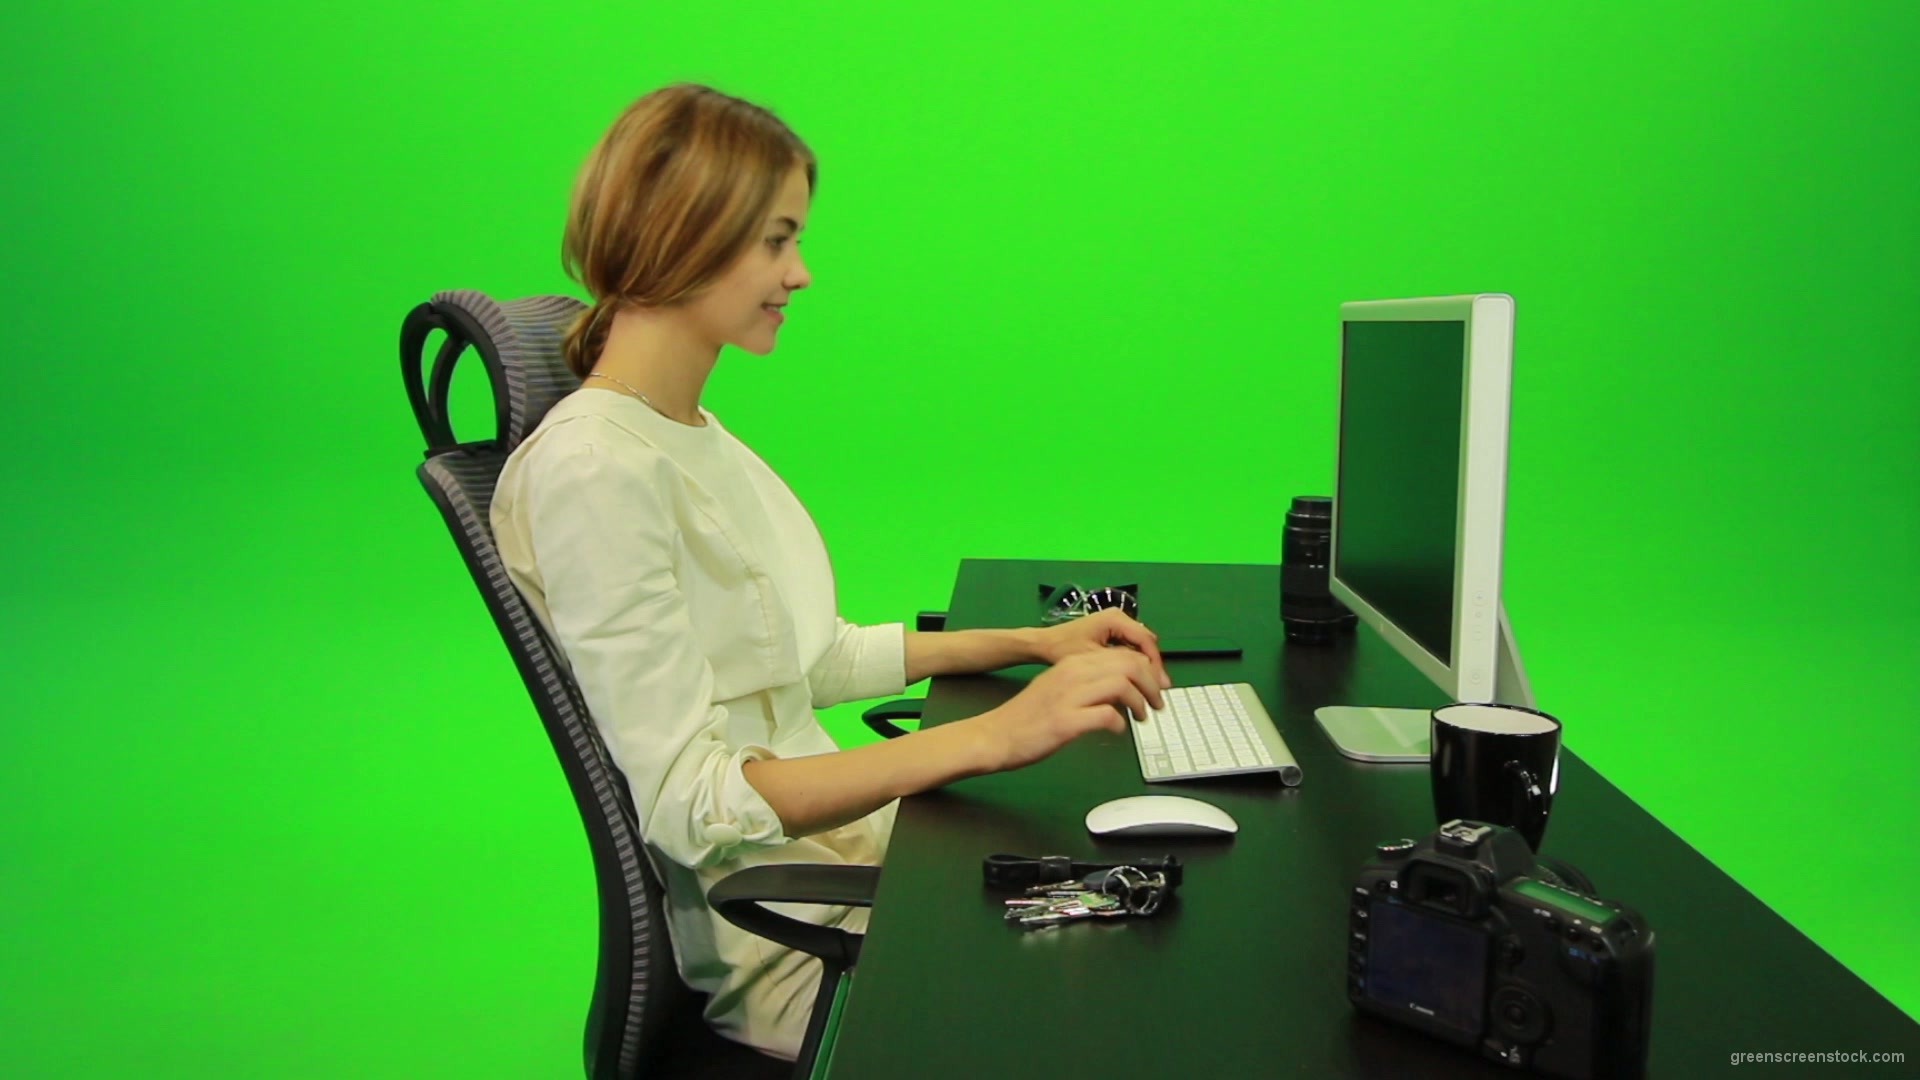 Laughing-Woman-Working-on-the-Computer-Green-Screen-Footage_009 Green Screen Stock